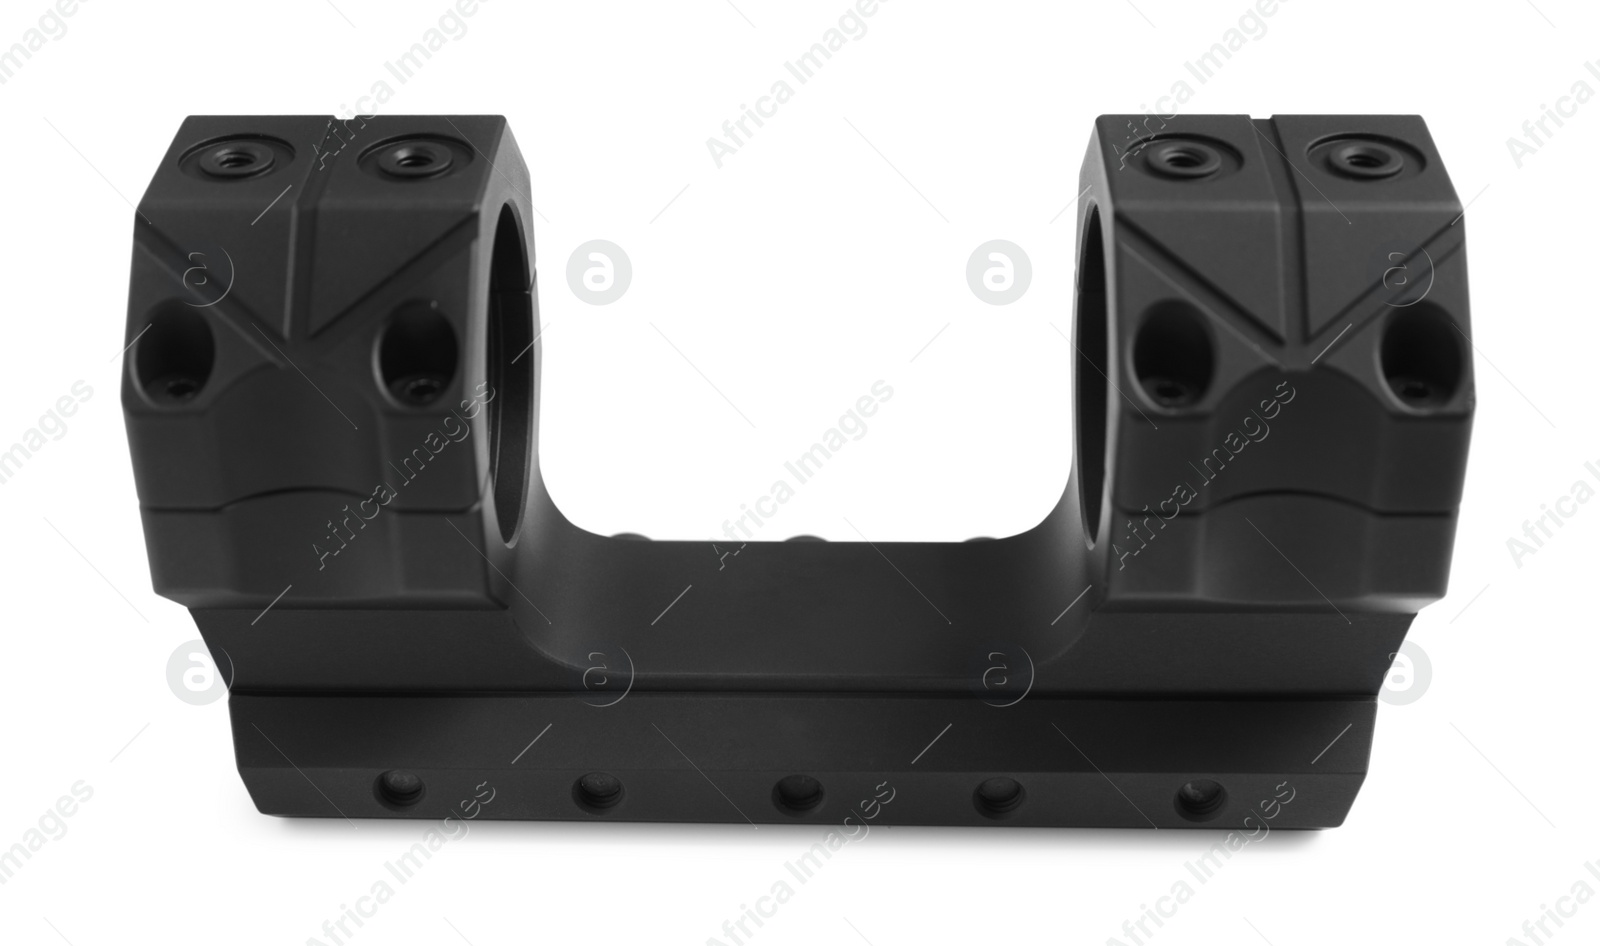 Photo of Quick disconnect sniper cantilever scope mount isolated on white